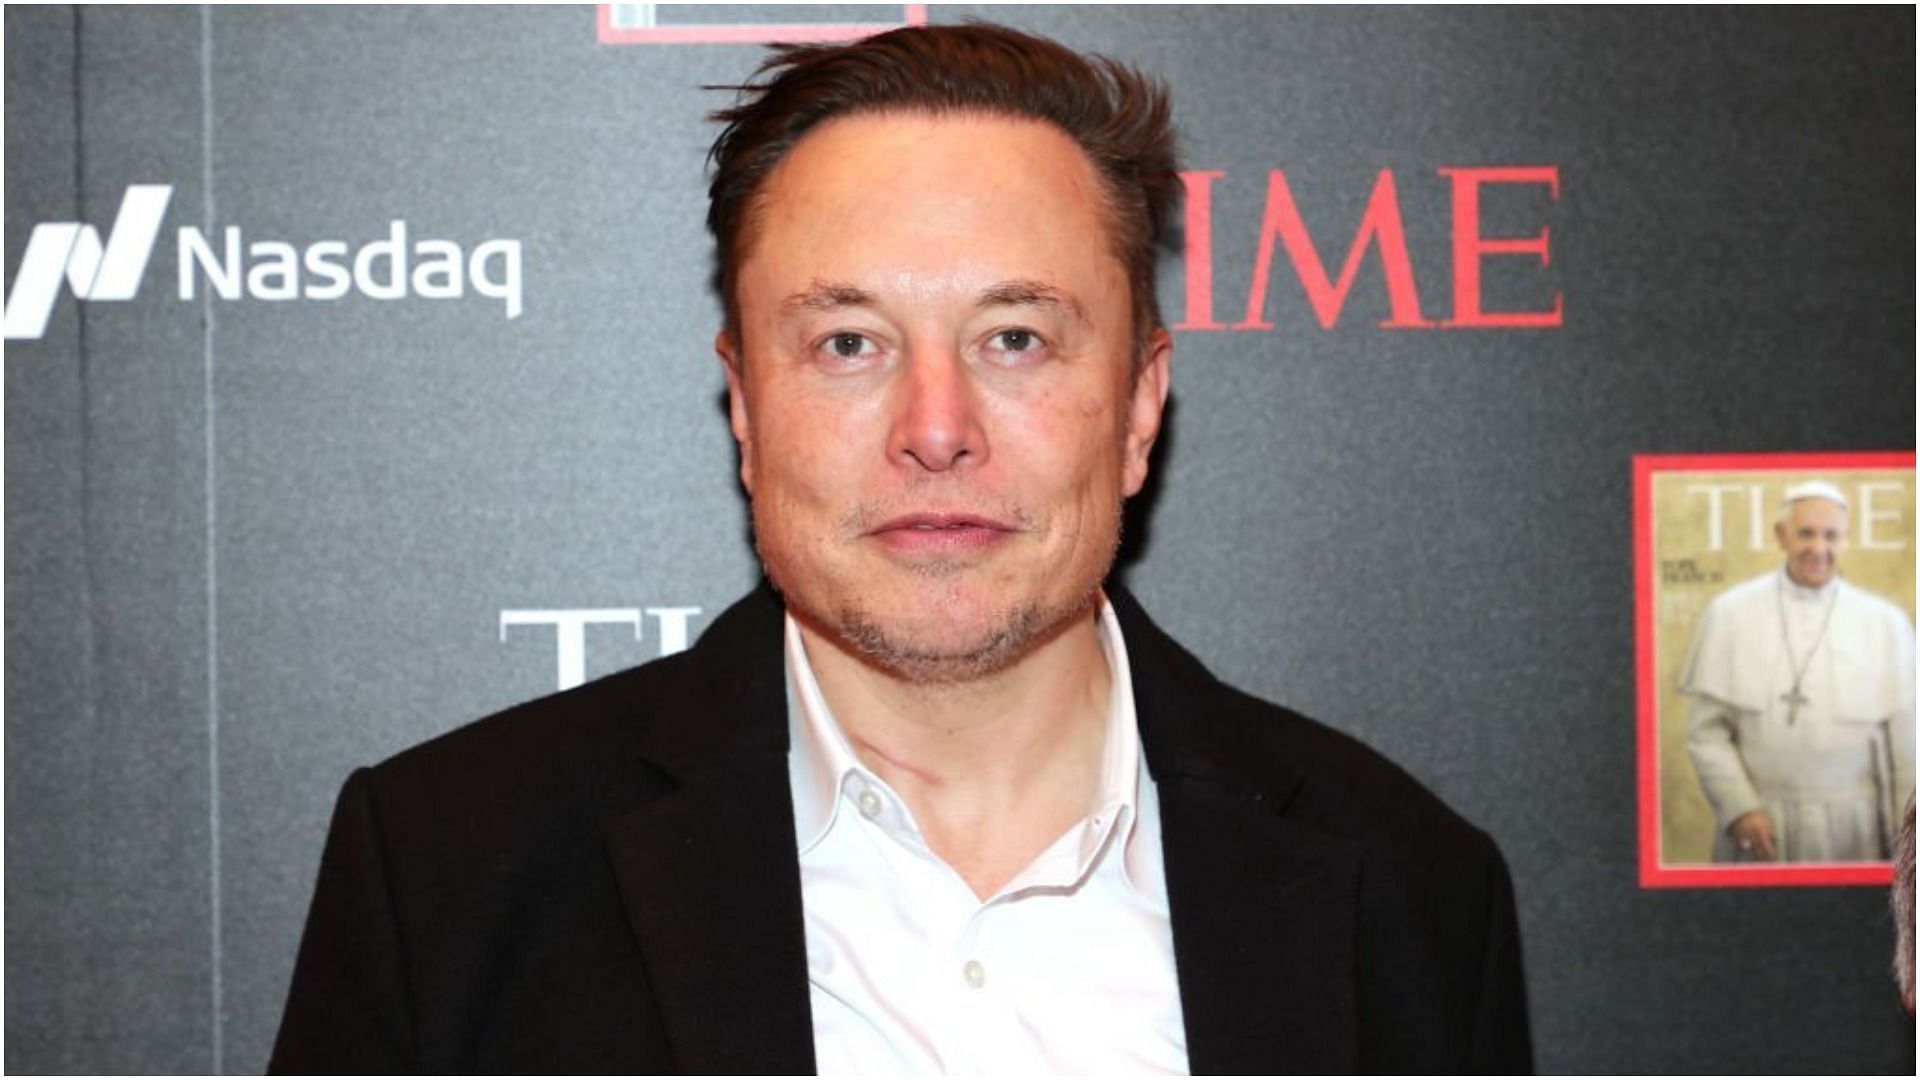 Elon Musk made a big offer to buy Twitter on April 14 (Image via Theo Wargo/Getty Images)